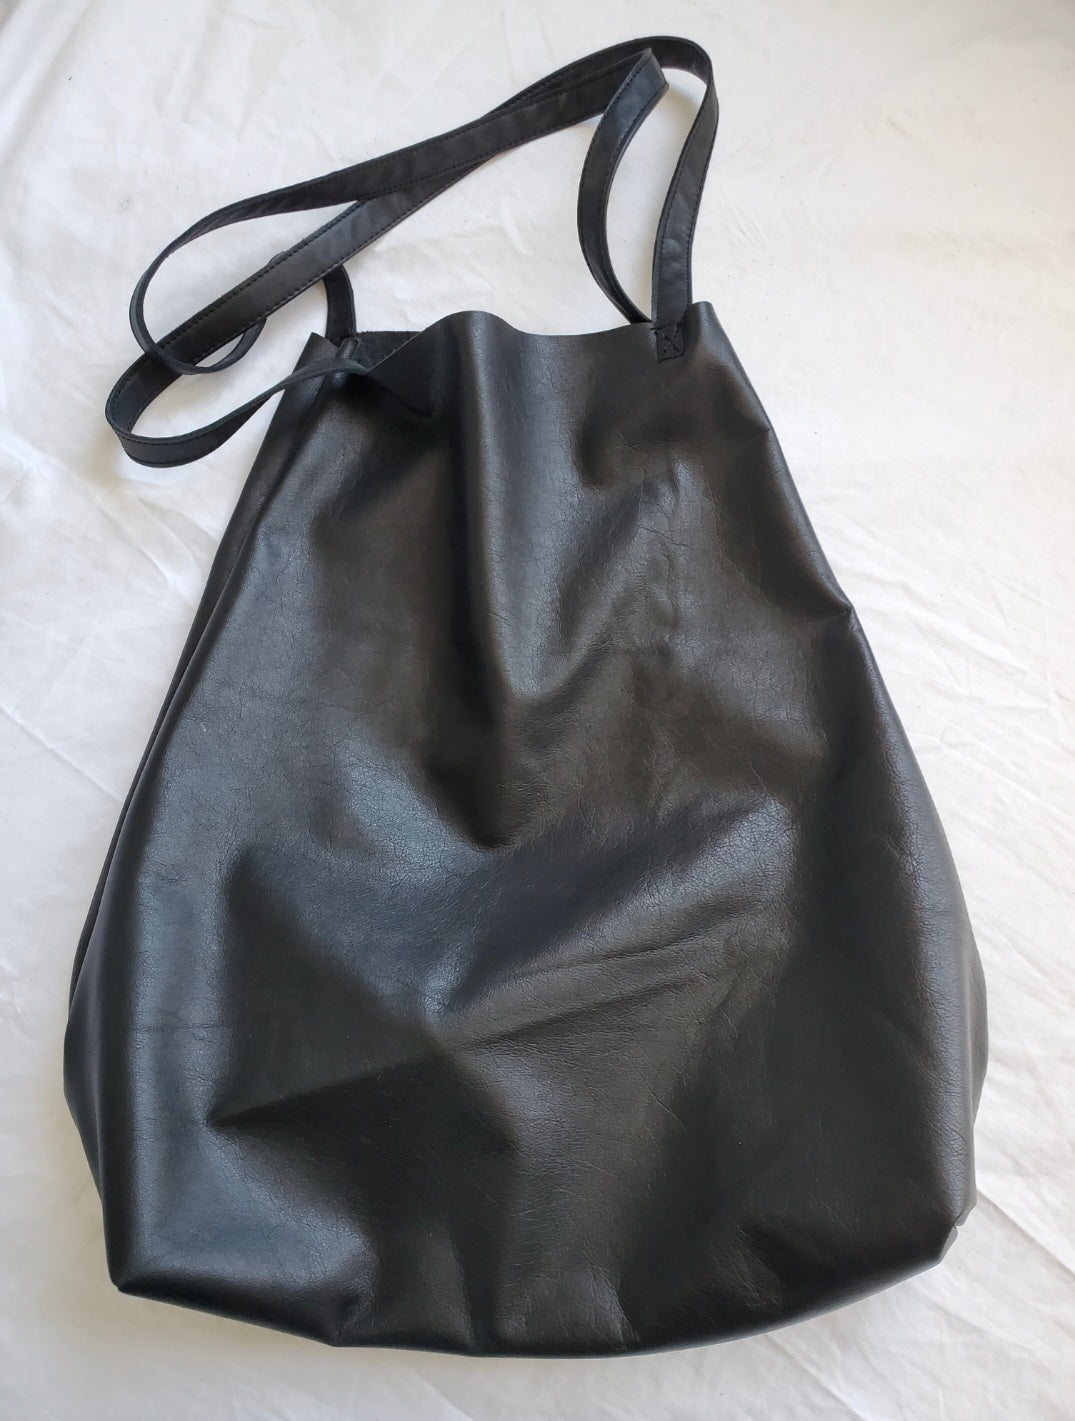 Black leather tote bag with 2 inside pockets. Made in Los Angeles